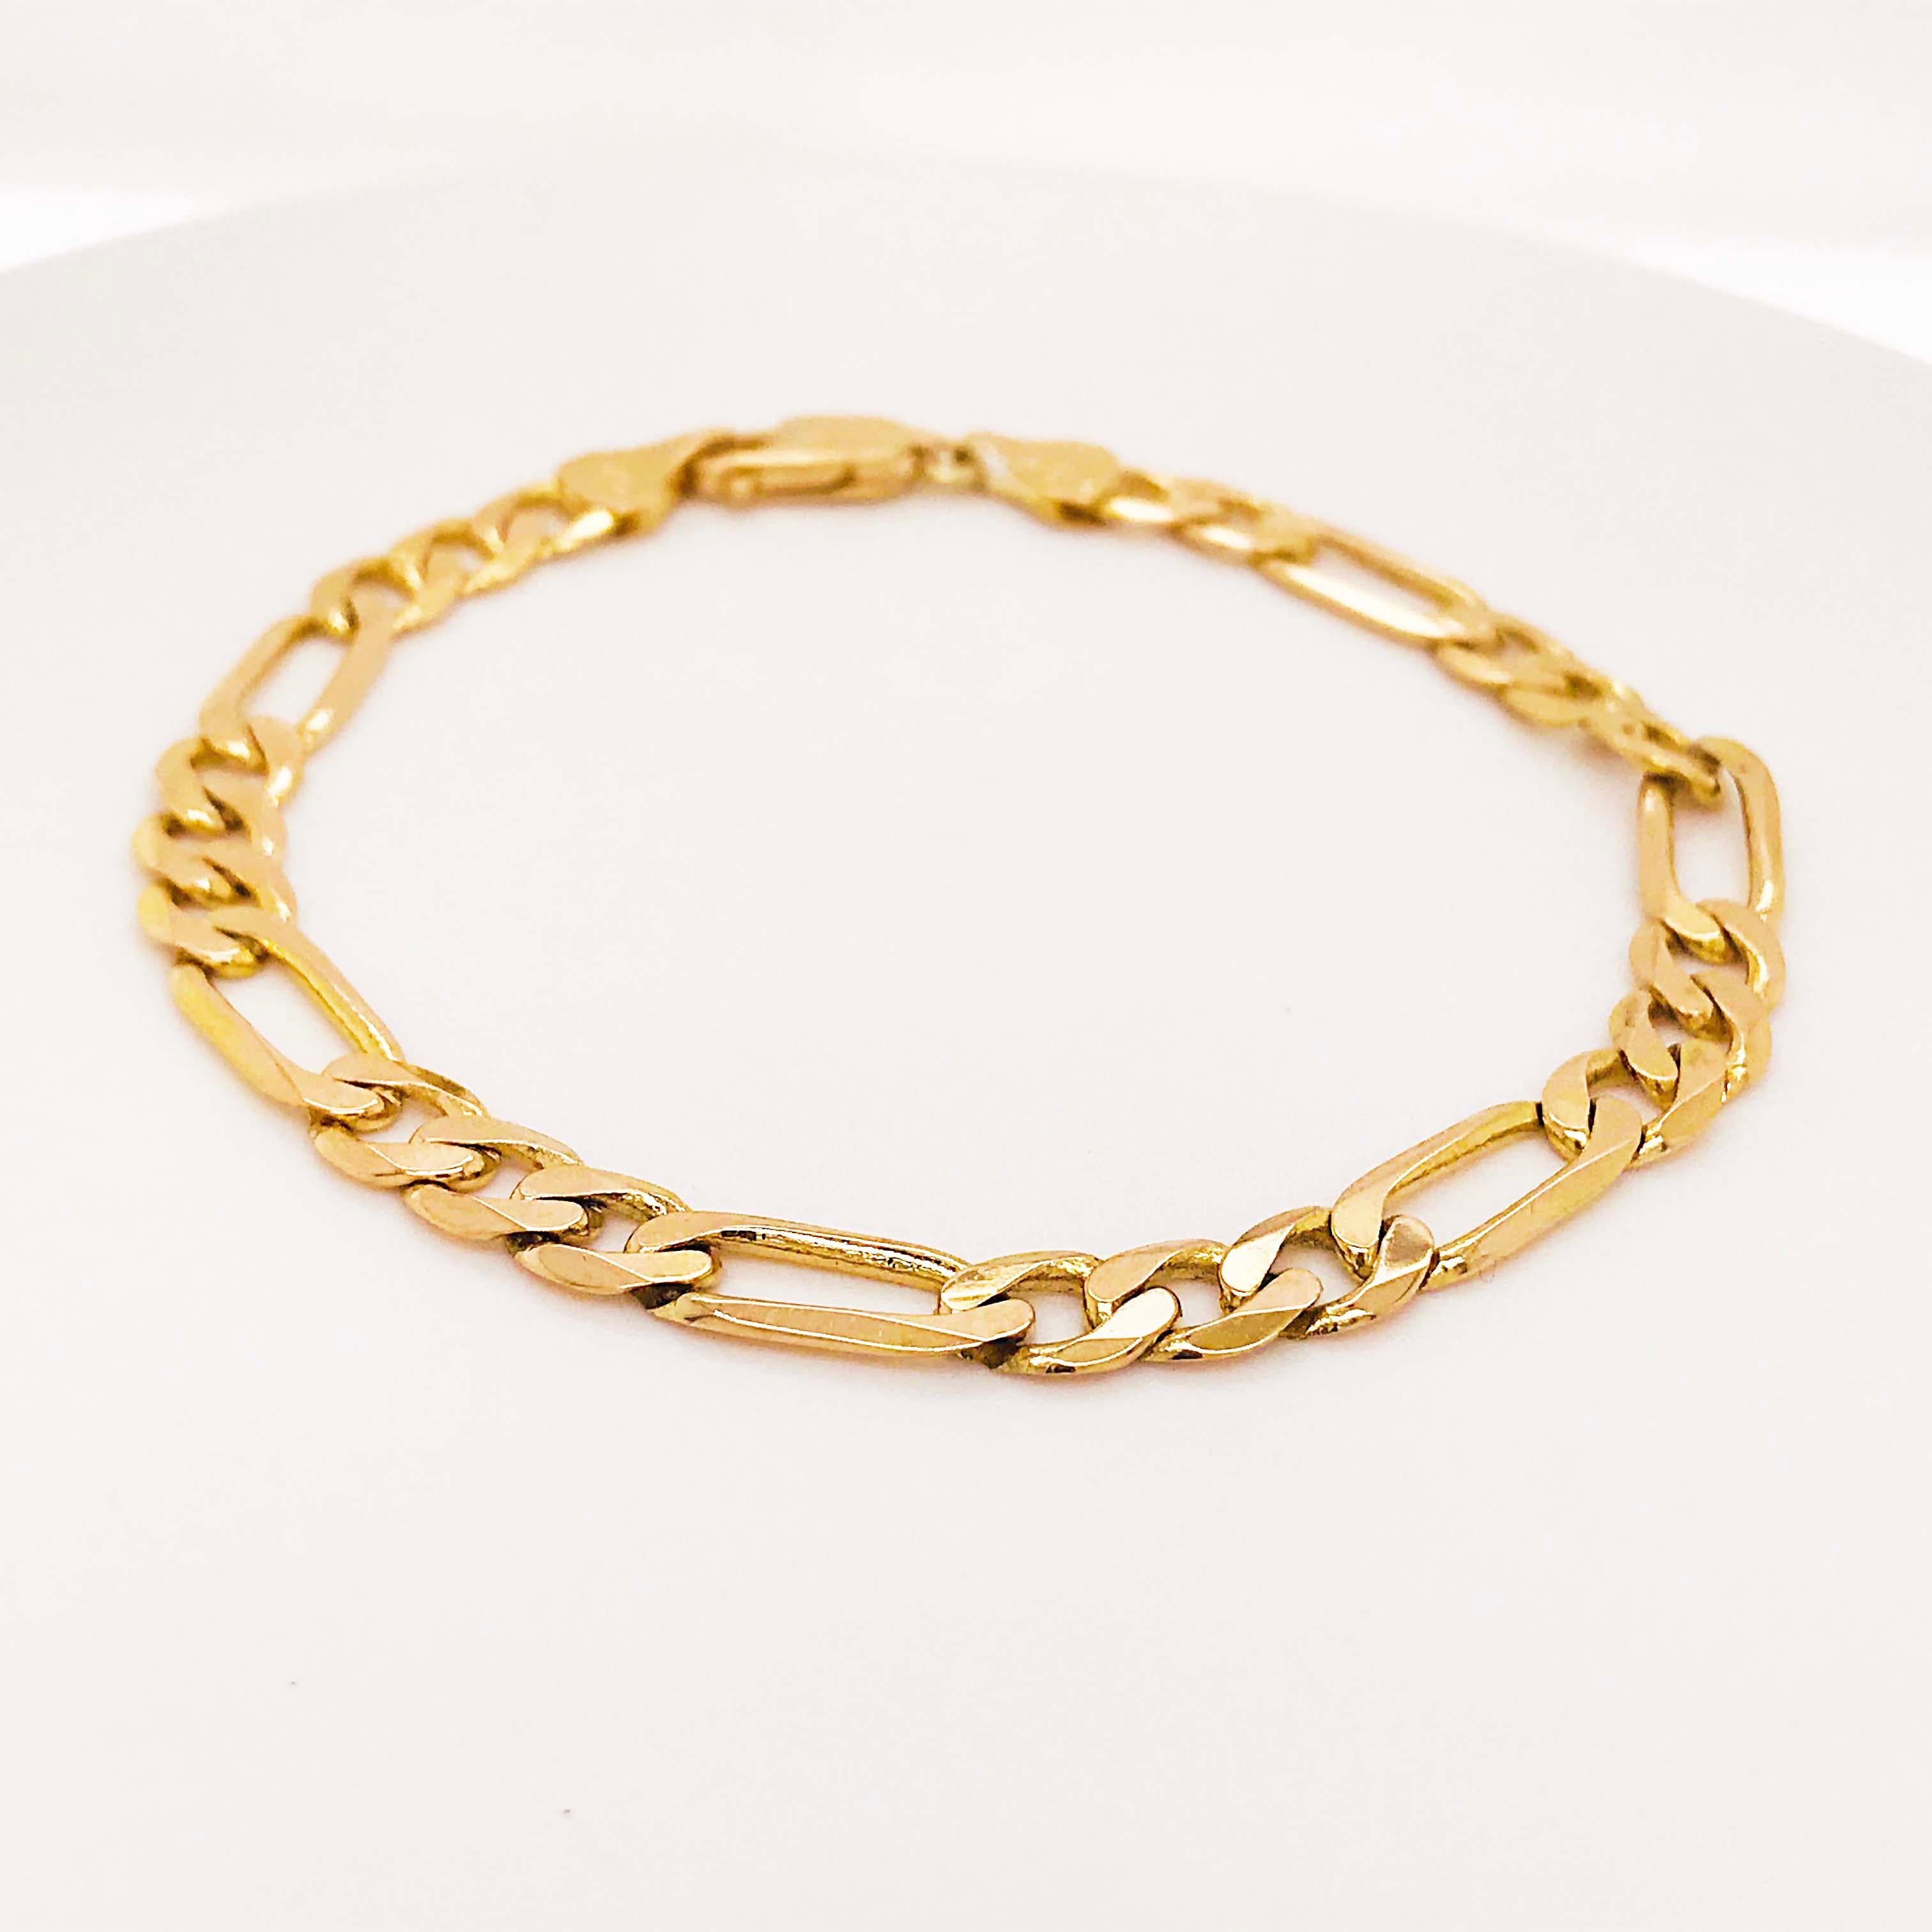 Heavy Figaro Chain Link Bracelet and Large Clasp, 14 Karat Gold 8 Inches Long 1